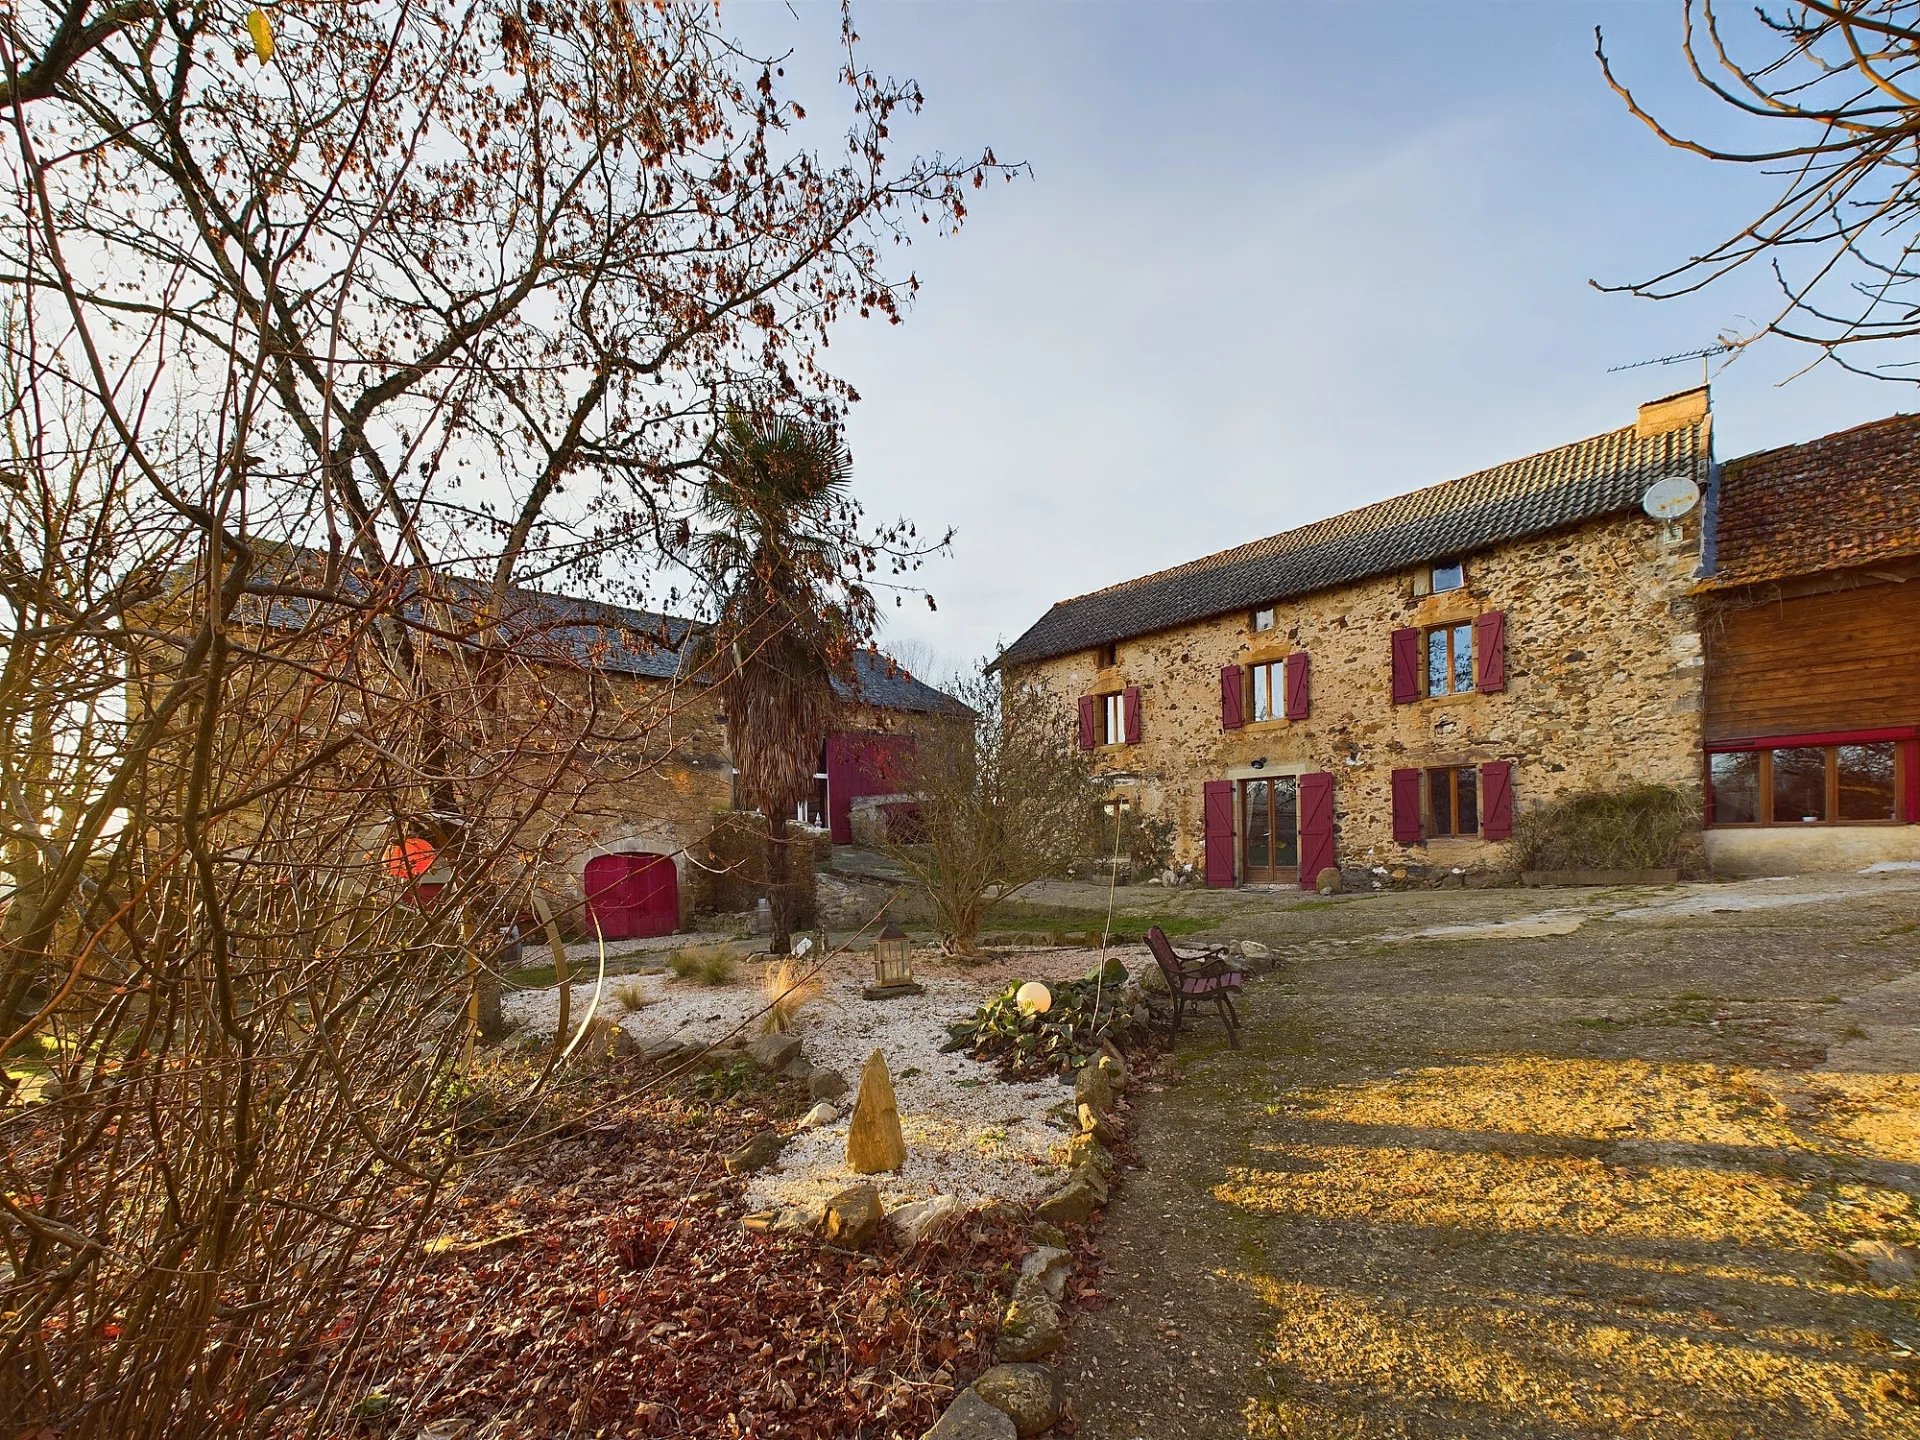 Welcome to this exceptional rural property in the Tarn!